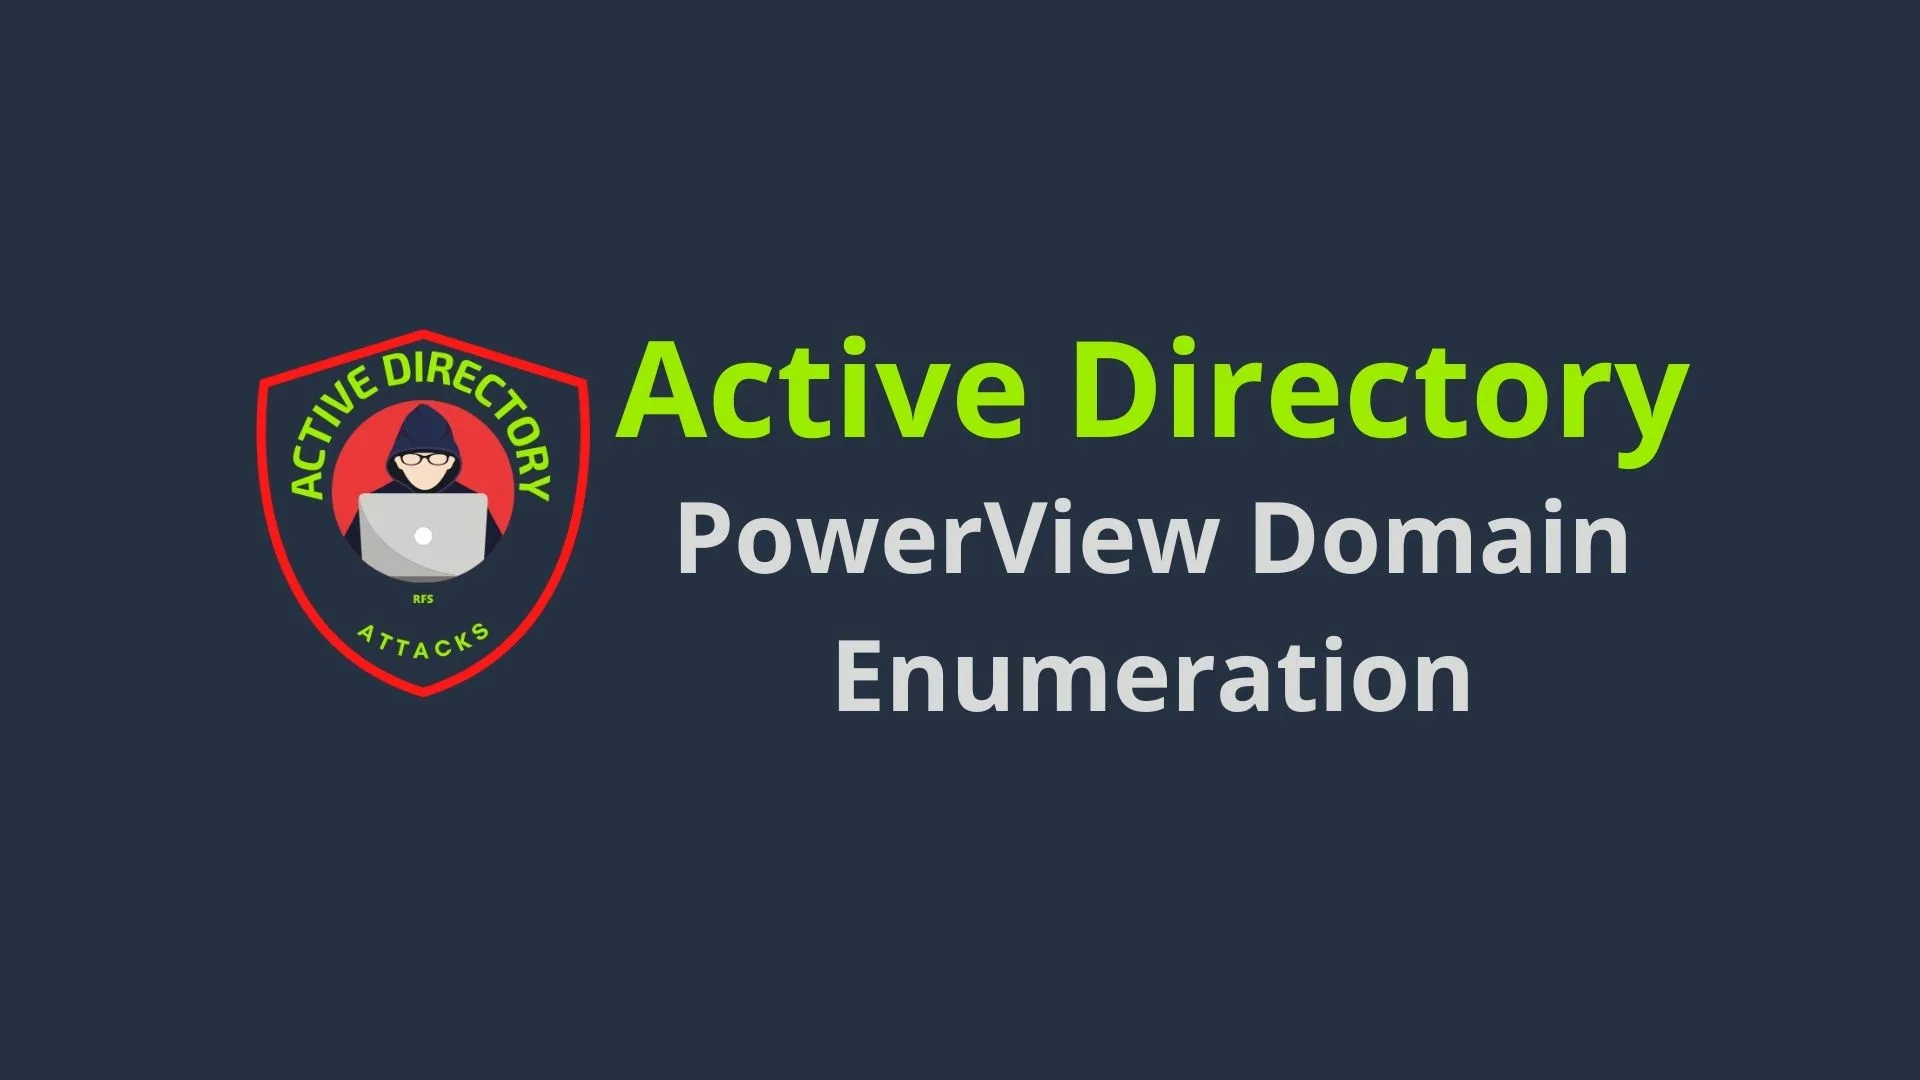 PowerView Domain Enumeration